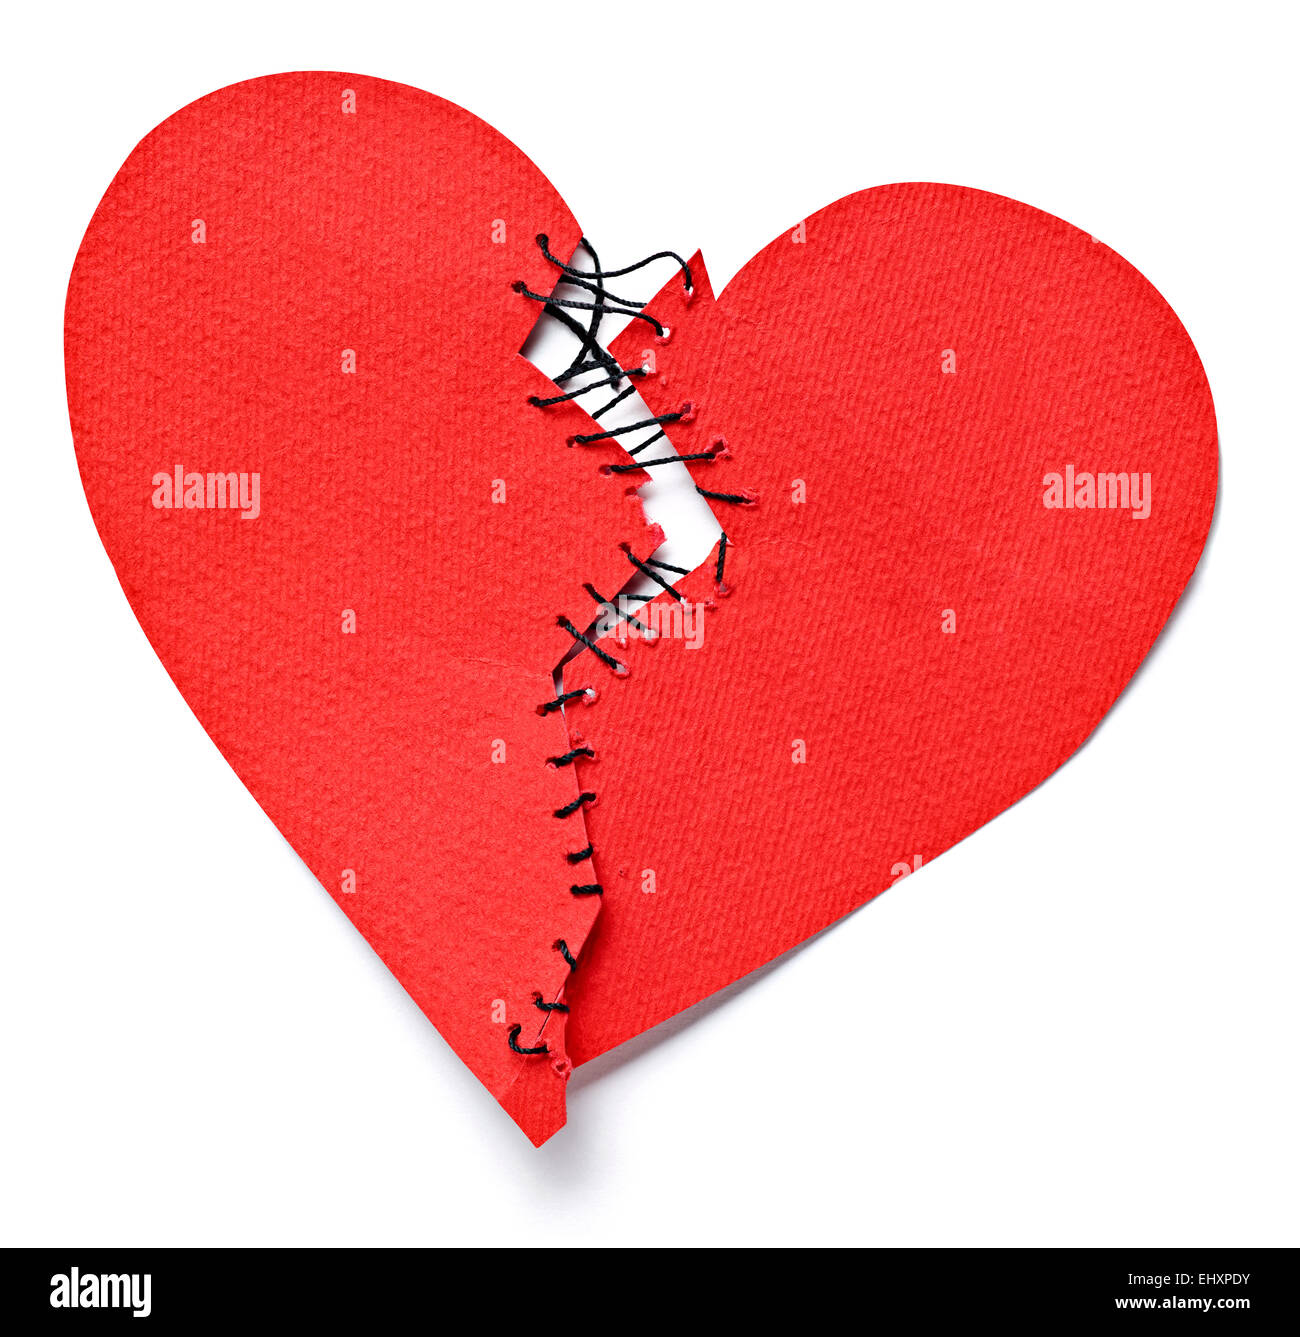 Broken heart Cut Out Stock Images & Pictures - Alamy